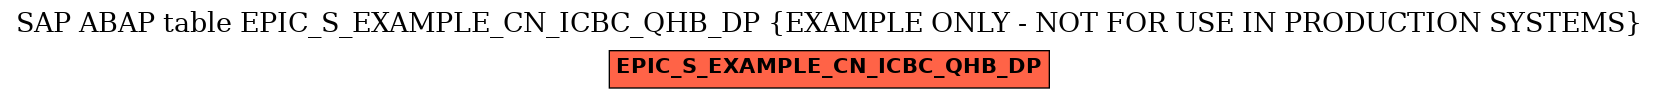 E-R Diagram for table EPIC_S_EXAMPLE_CN_ICBC_QHB_DP (EXAMPLE ONLY - NOT FOR USE IN PRODUCTION SYSTEMS)